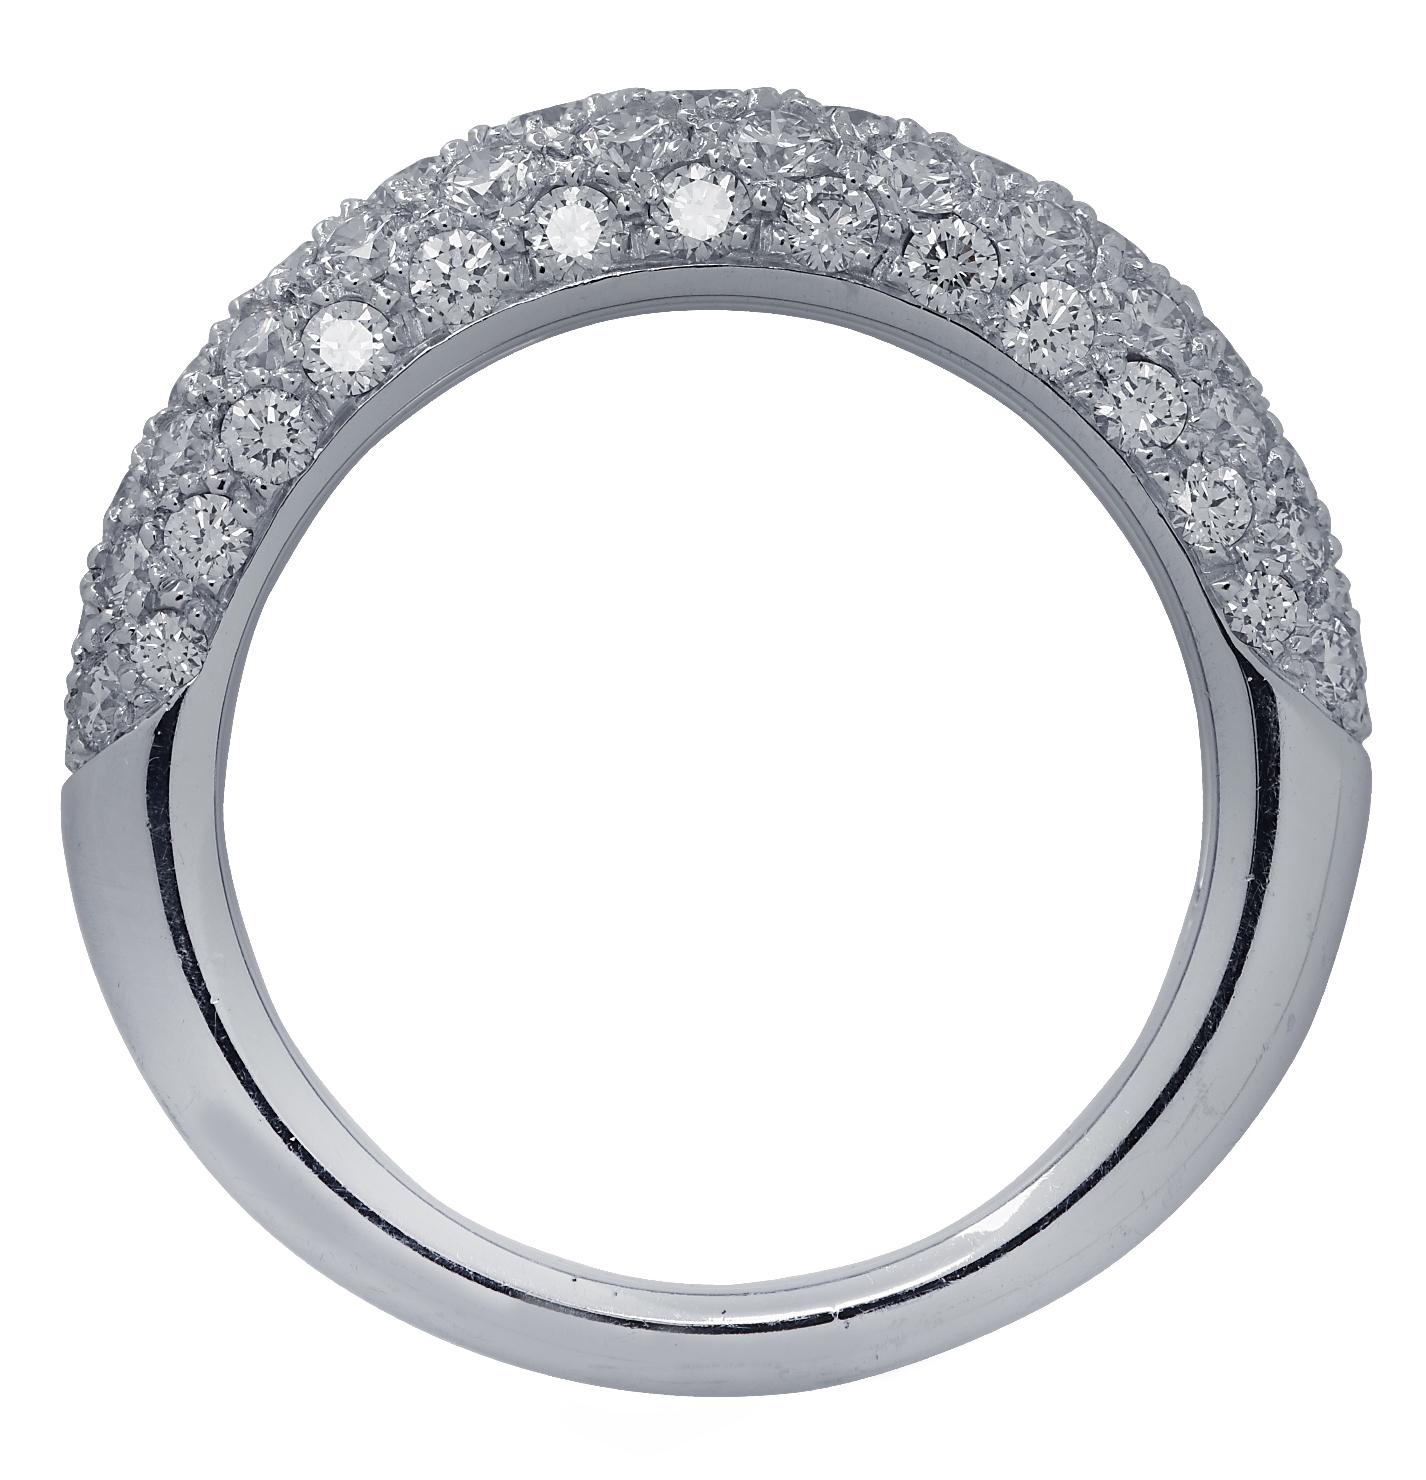 From the iconic house of Cartier, this spectacular Etincelle de Cartier diamond wedding band is expertly crafted in 18 karat white gold, and features a dome shaped band encrusted with 69 round brilliant cut diamonds weighing approximately 1.33